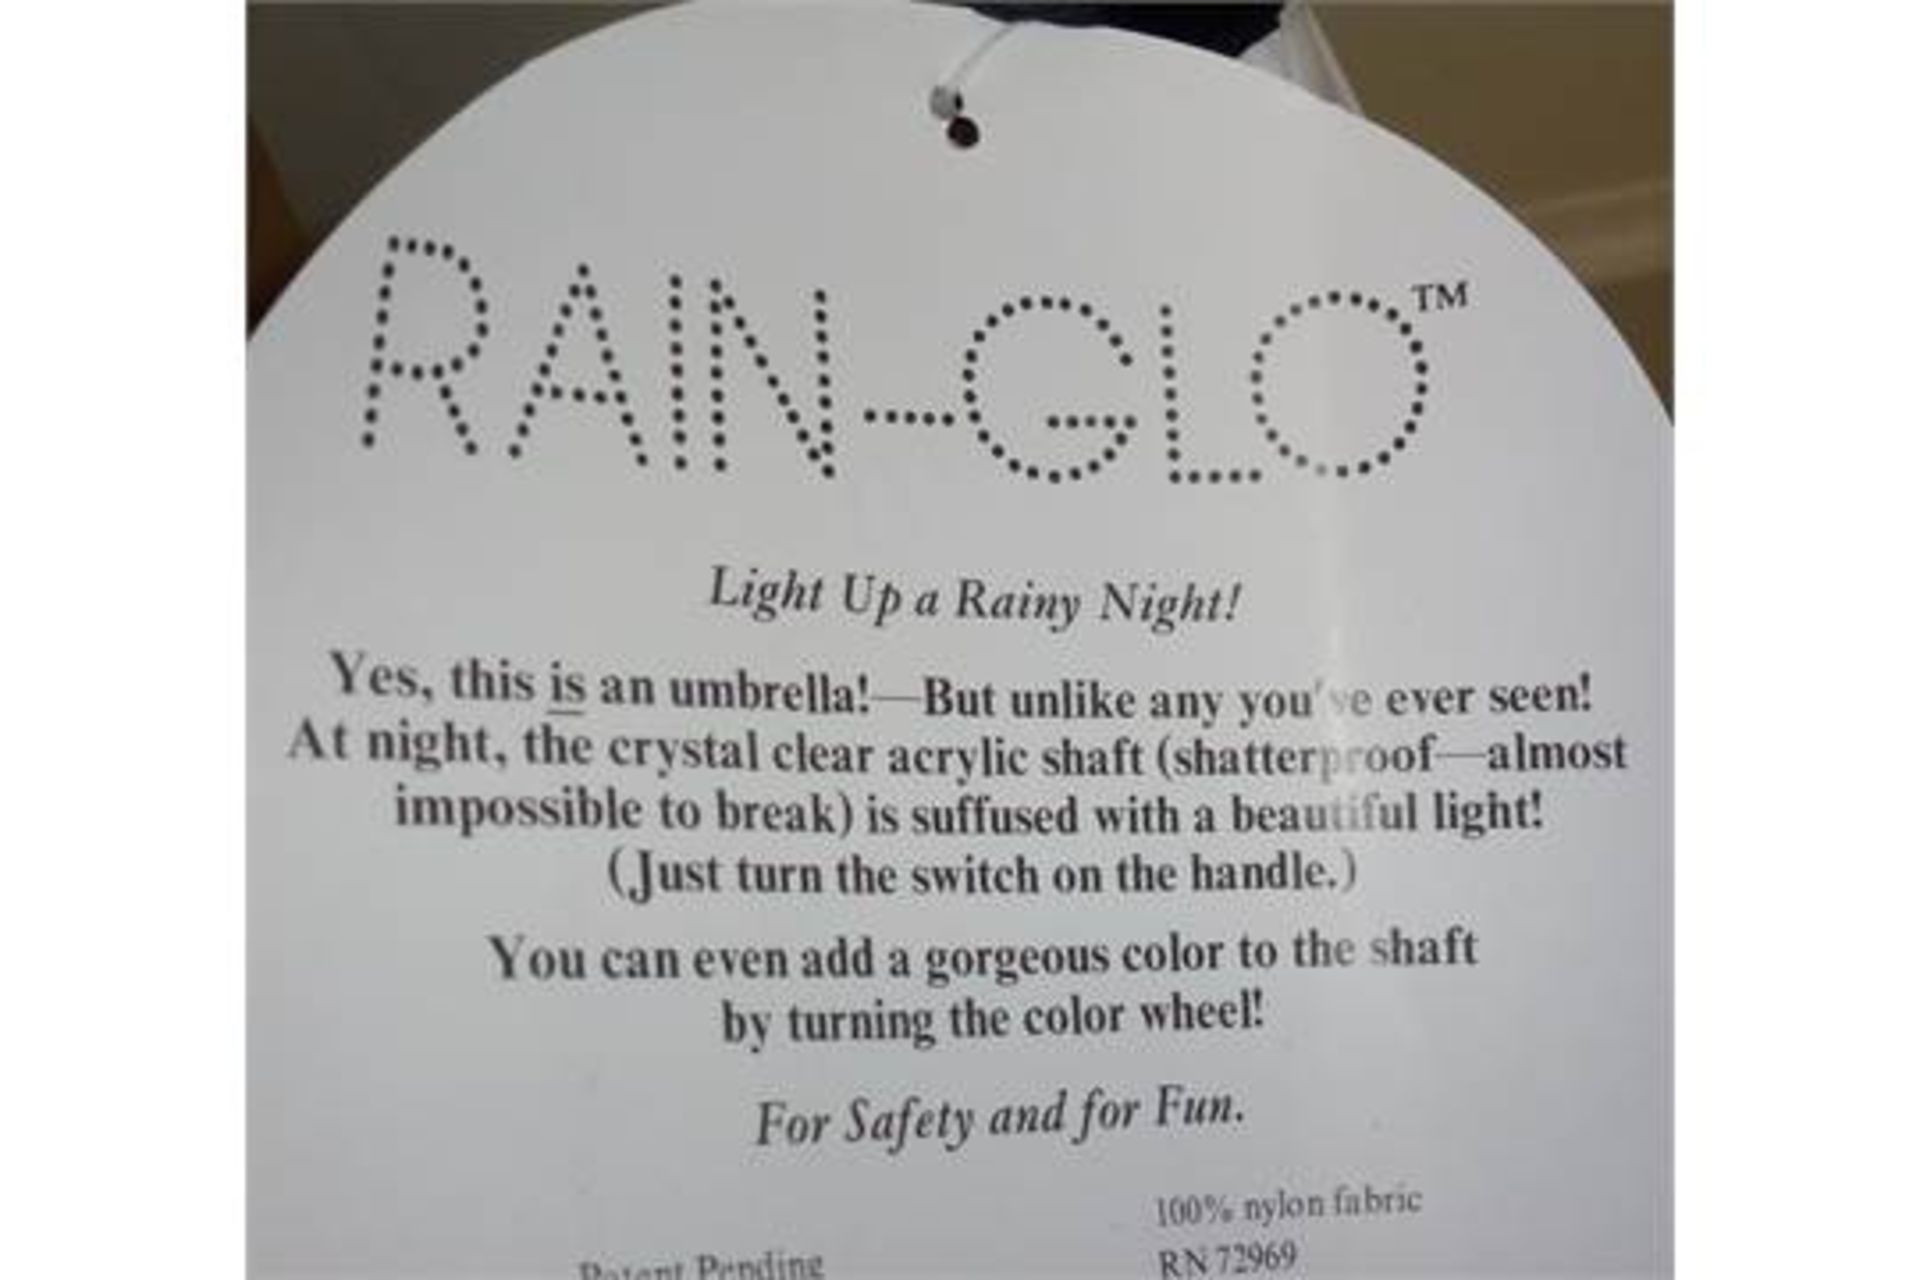 1 x Rain-Glo Illuminated Umbrella - Ideal For Festivals or Camping - Bright LED Light - New and - Image 3 of 3